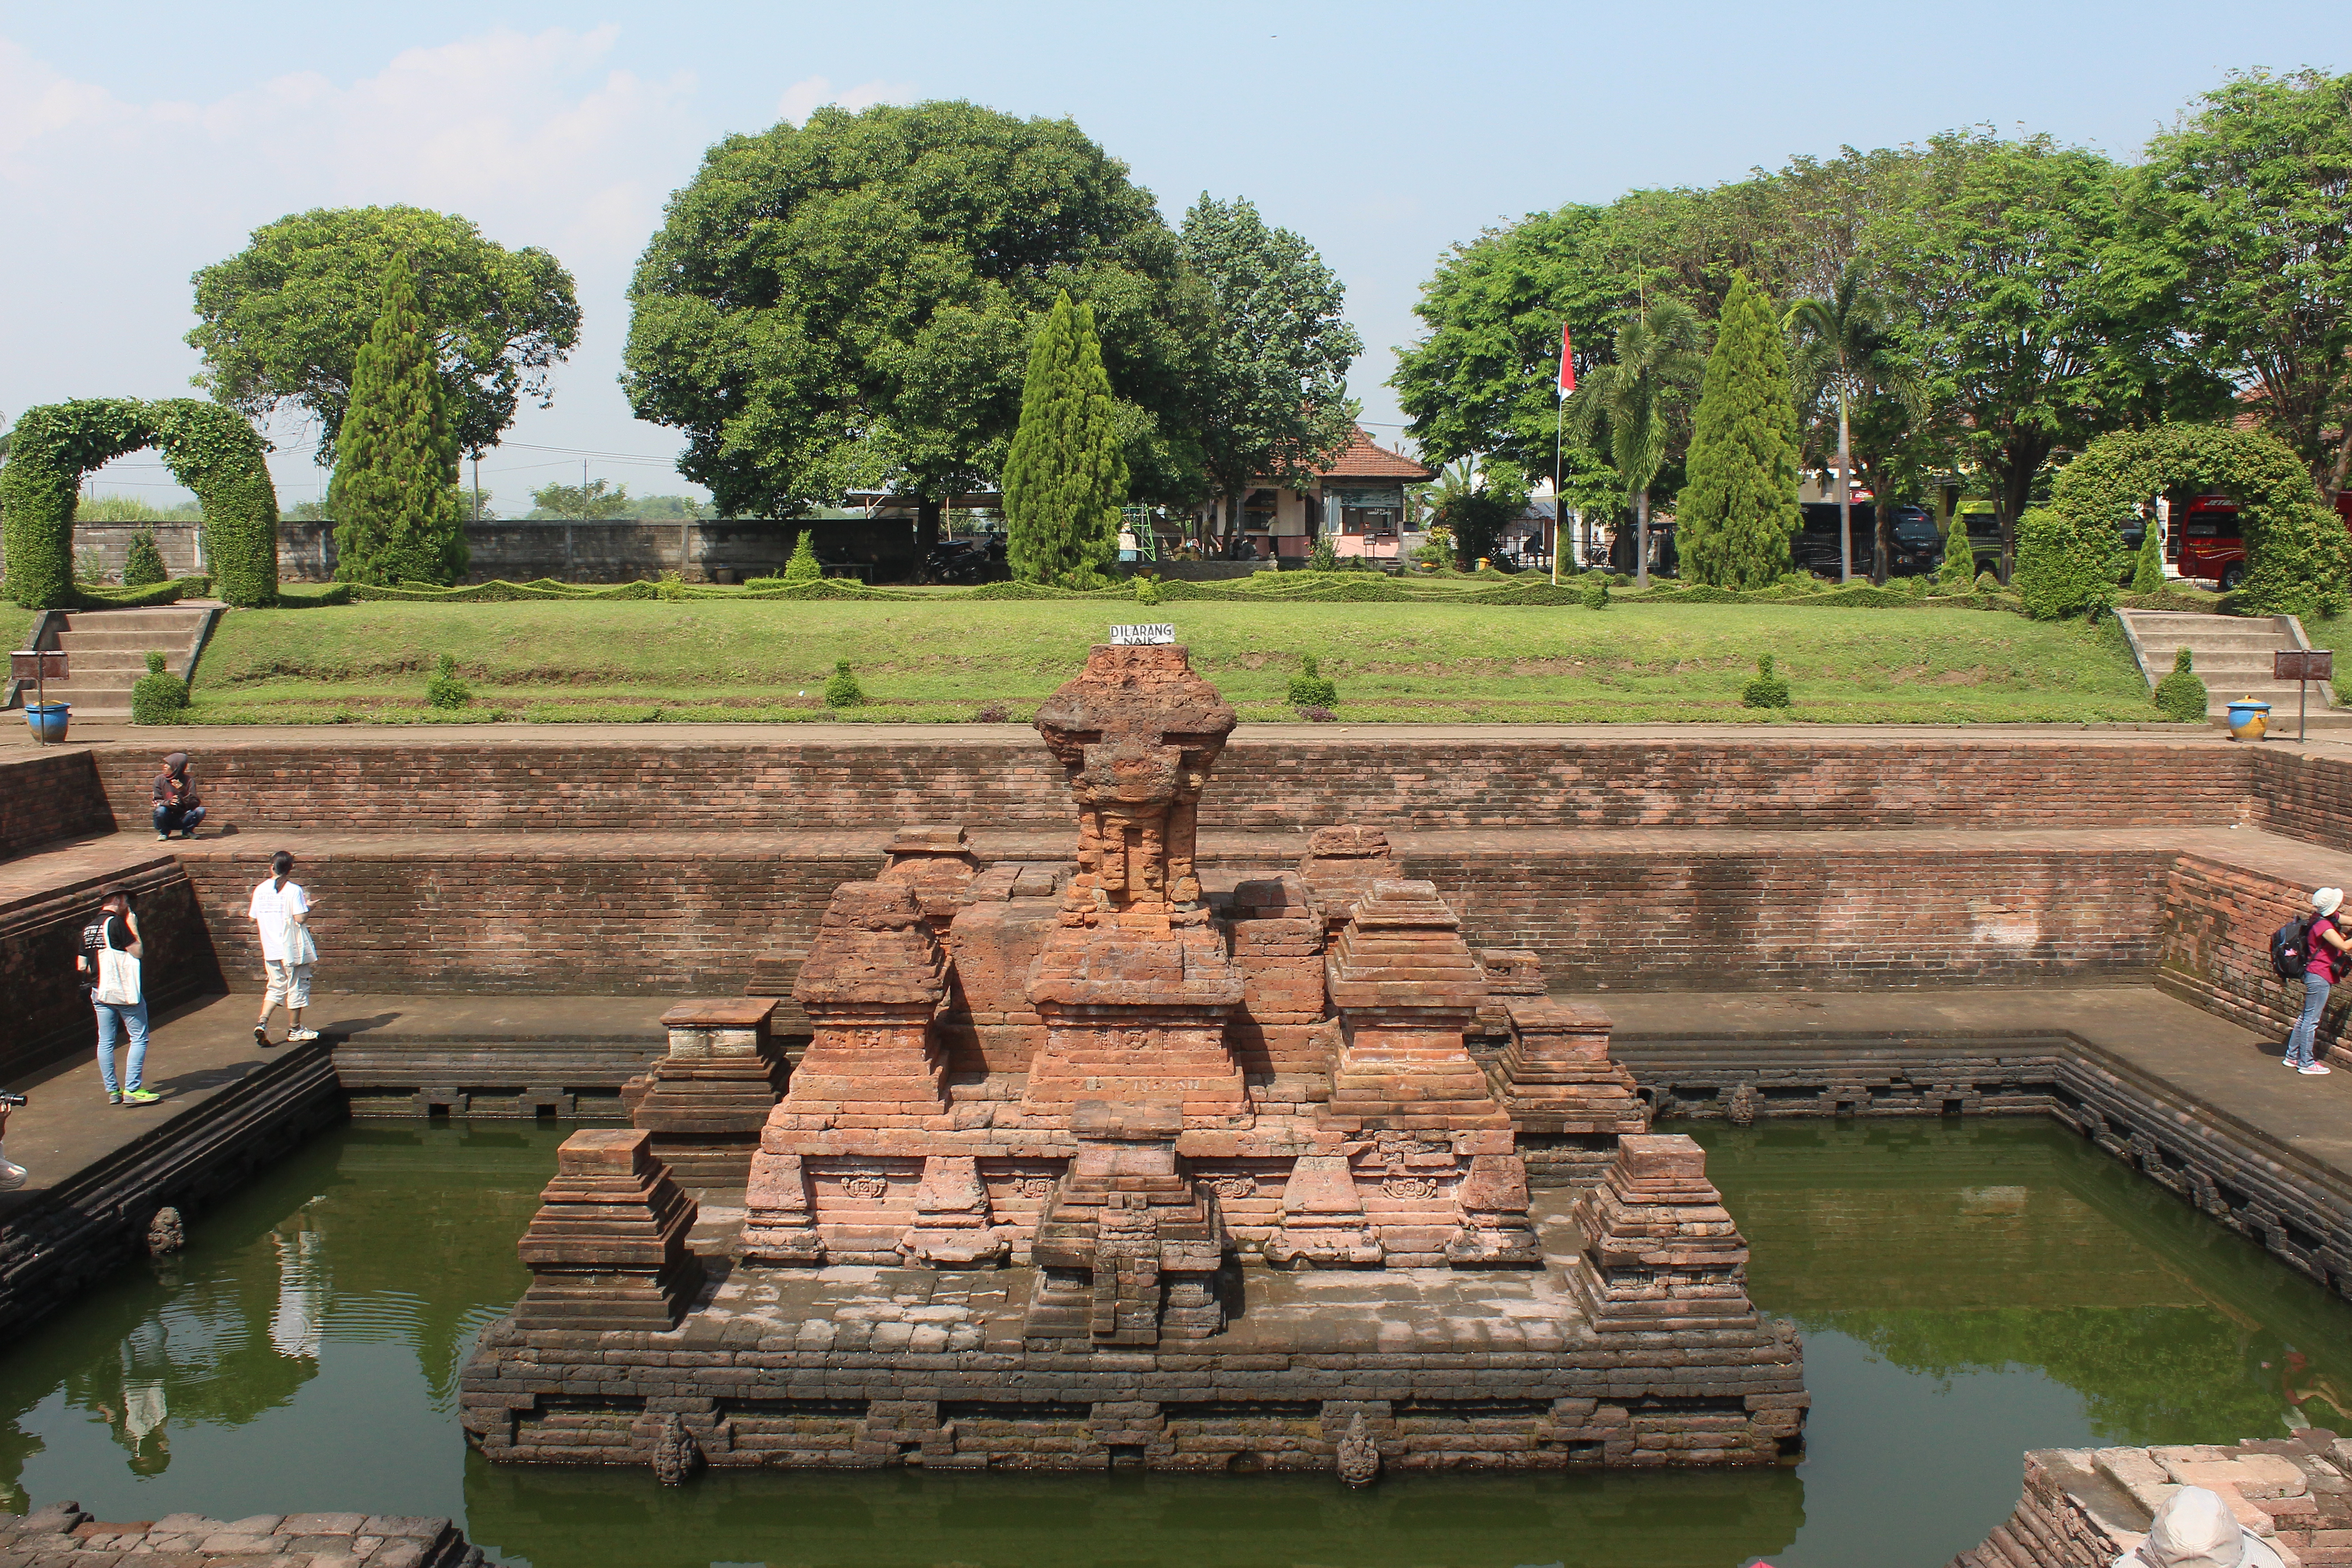 Brick temple in a below-groundlevel pool